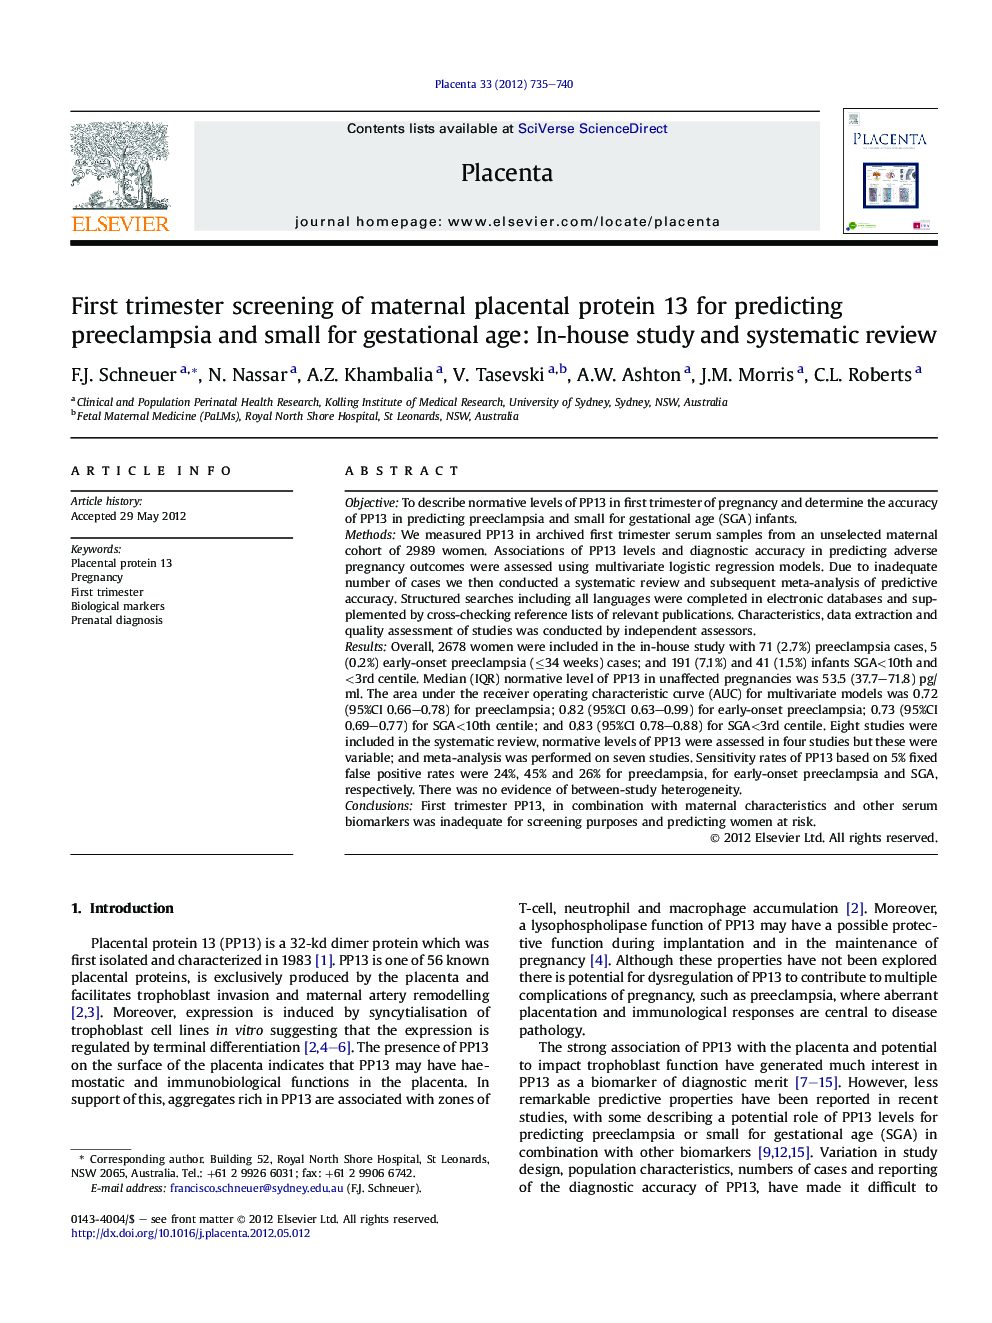 First trimester screening of maternal placental protein 13 for predicting preeclampsia and small for gestational age: In-house study and systematic review